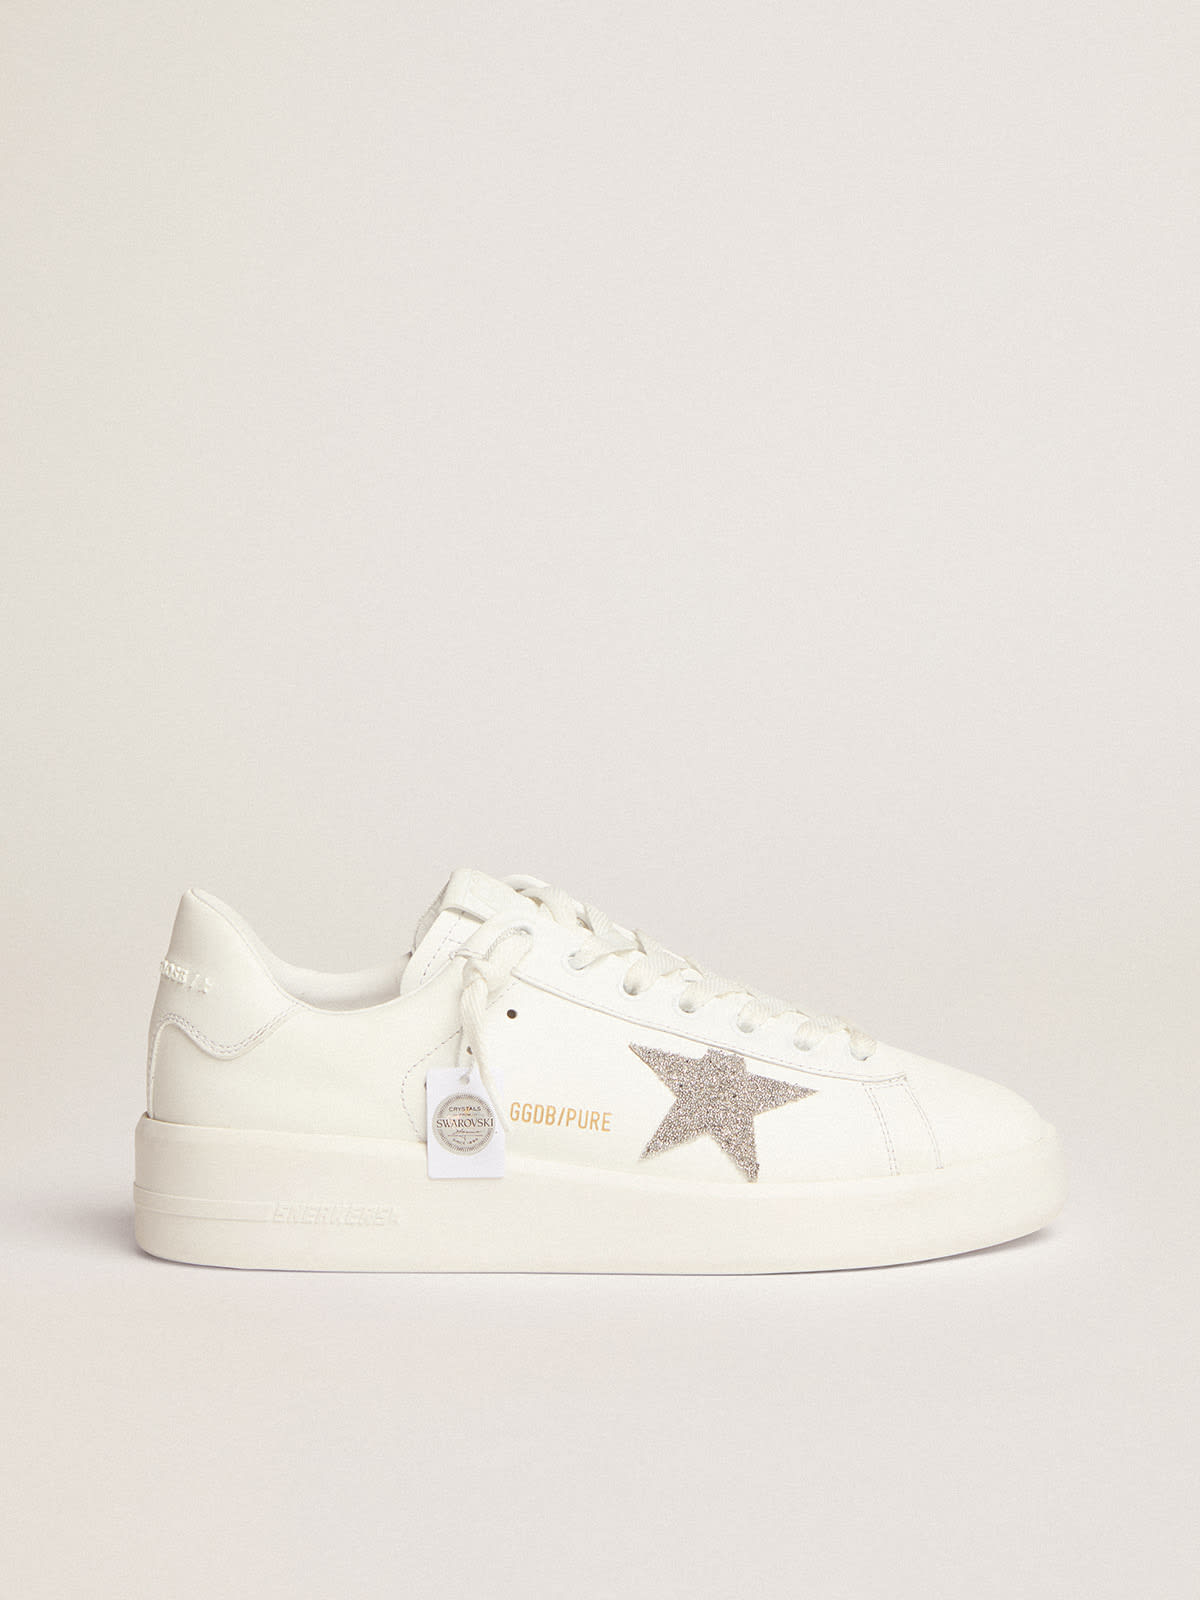 Golden Goose - Purestar in white leather with silver-colored Swarovski crystal star in 